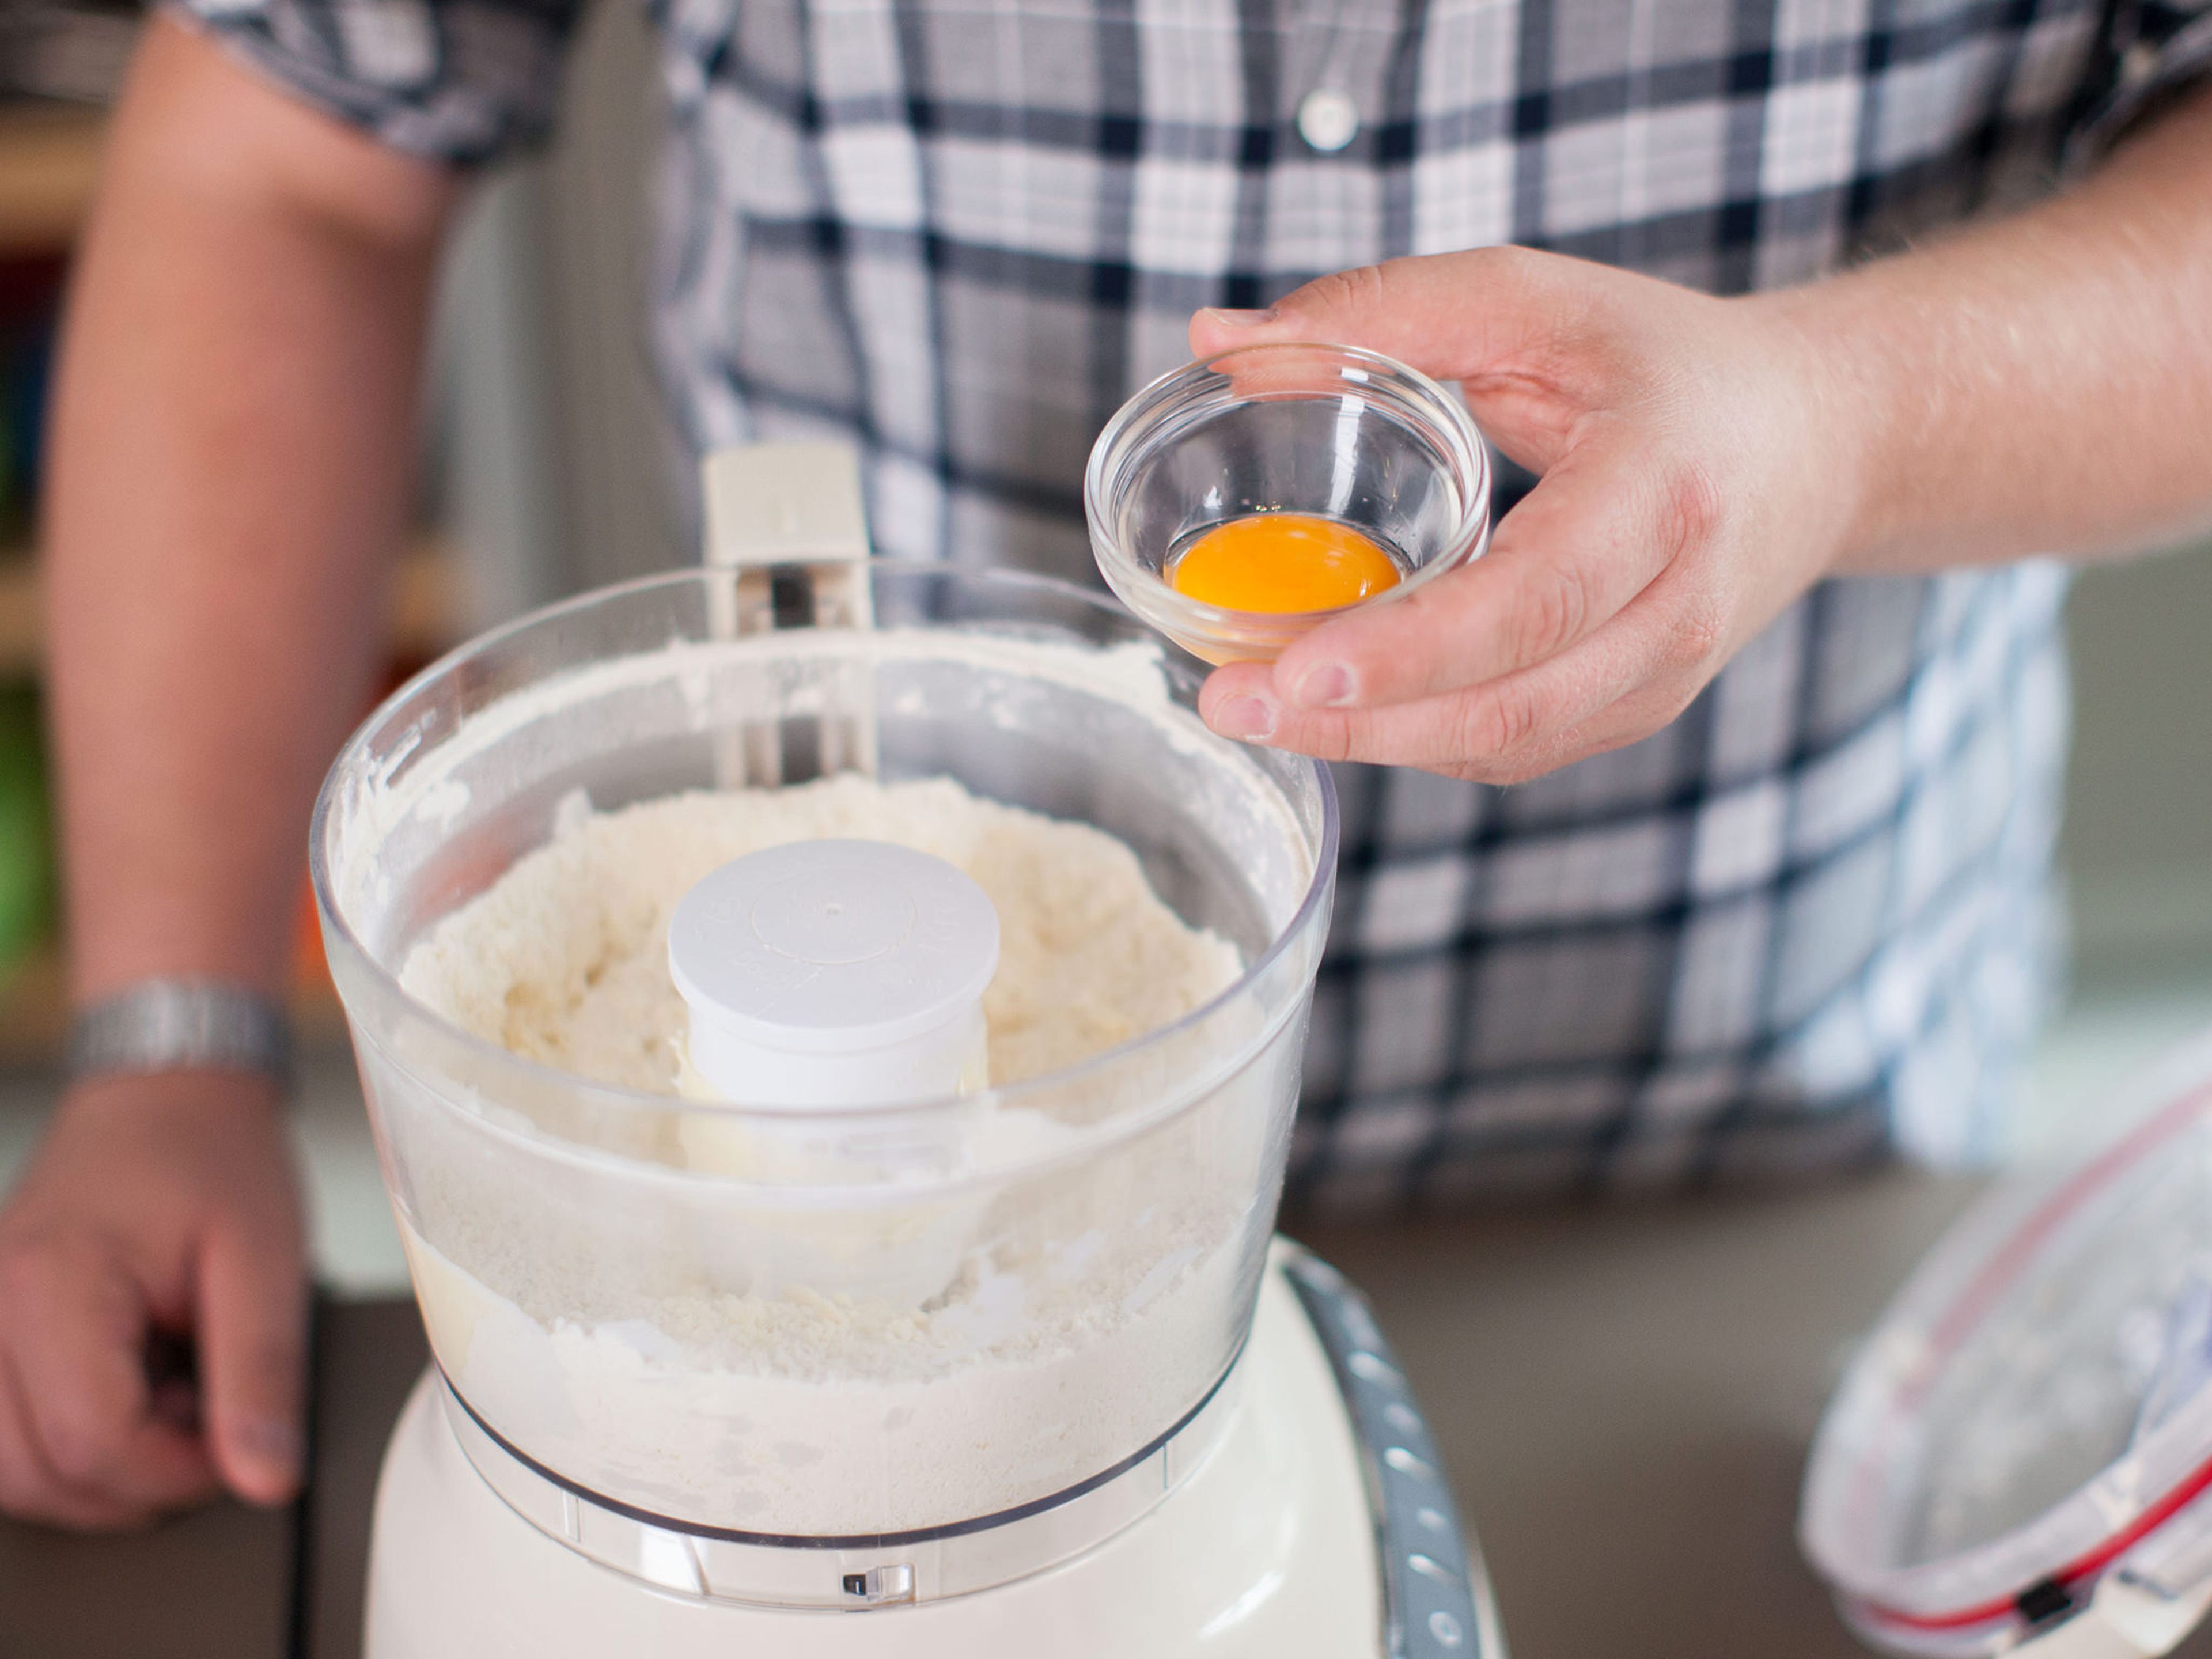 Add flour, butter, and confectioner’s sugar to a food processor and pulse briefly. Separate a part of the eggs and add yolk as well as cold water to the food processor. Pulse until dough comes together. Wrap in plastic wrap and let rest in the refrigerator for approx. 15 min.